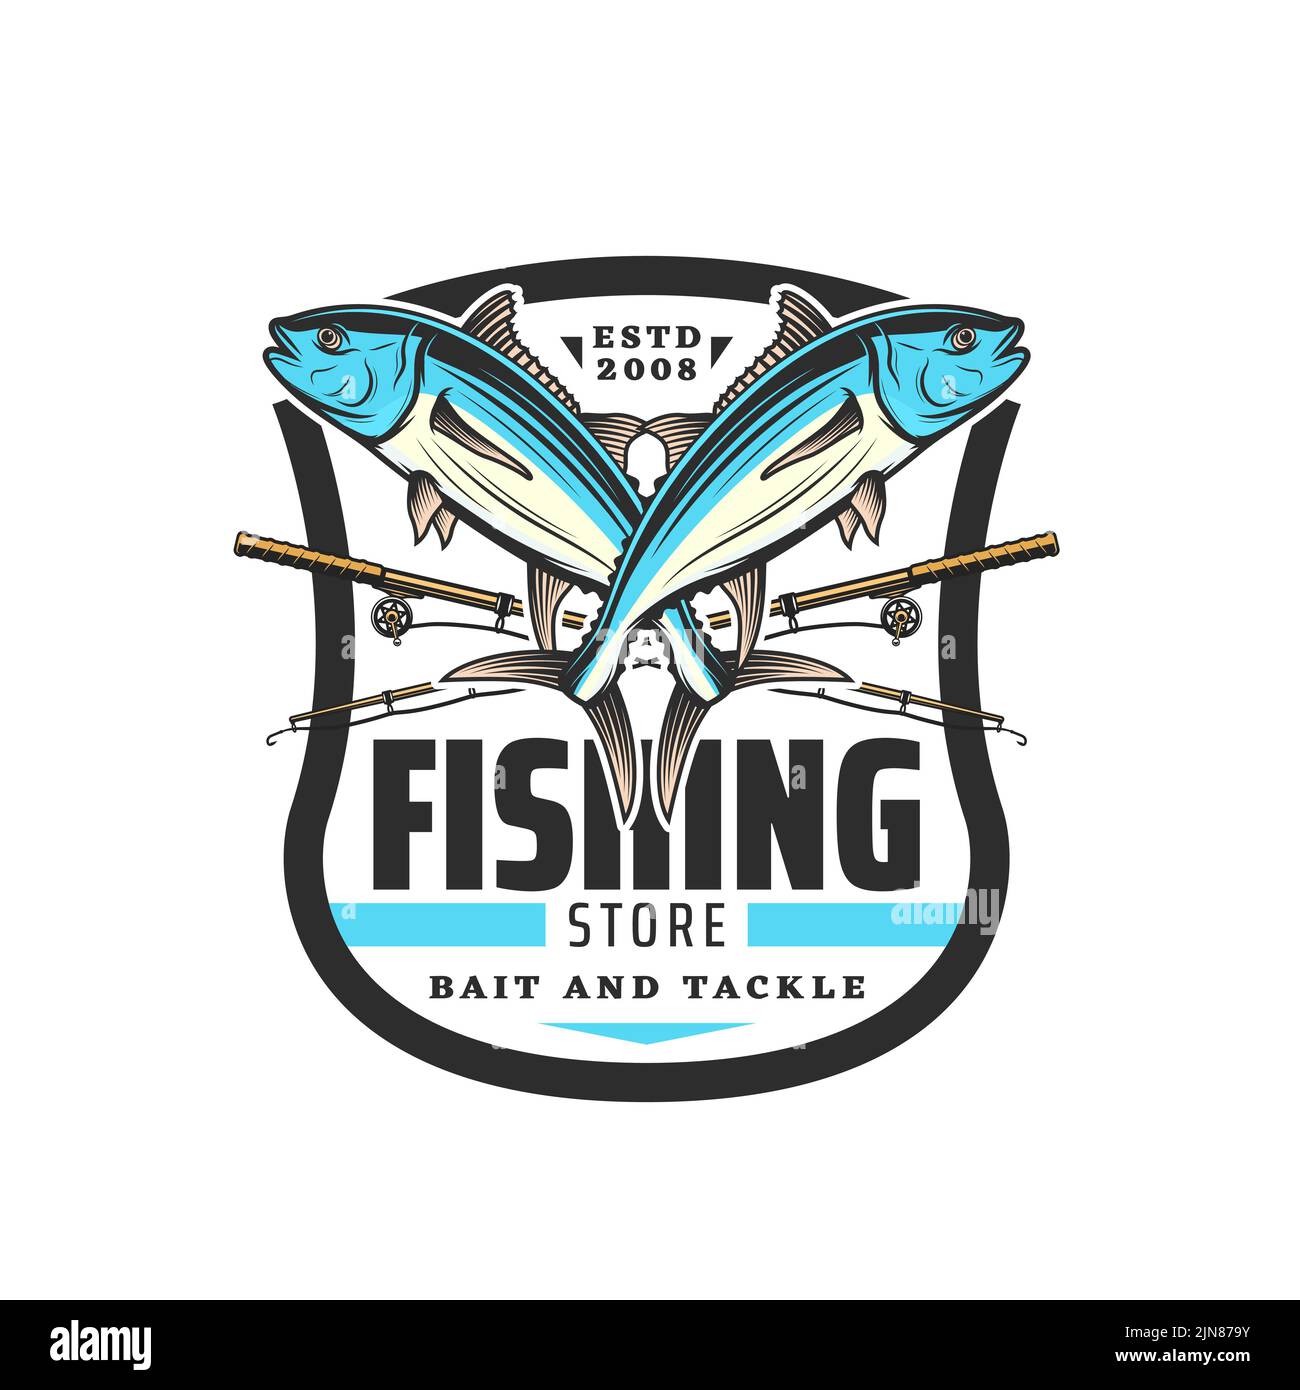 https://c8.alamy.com/comp/2JN879Y/fishing-store-vector-icon-with-crossed-tuna-fish-and-fisherman-spinning-rods-angling-sport-rods-with-hooks-lures-or-baits-lines-and-reels-with-ocean-or-sea-water-fish-fishing-tackle-shop-design-2JN879Y.jpg